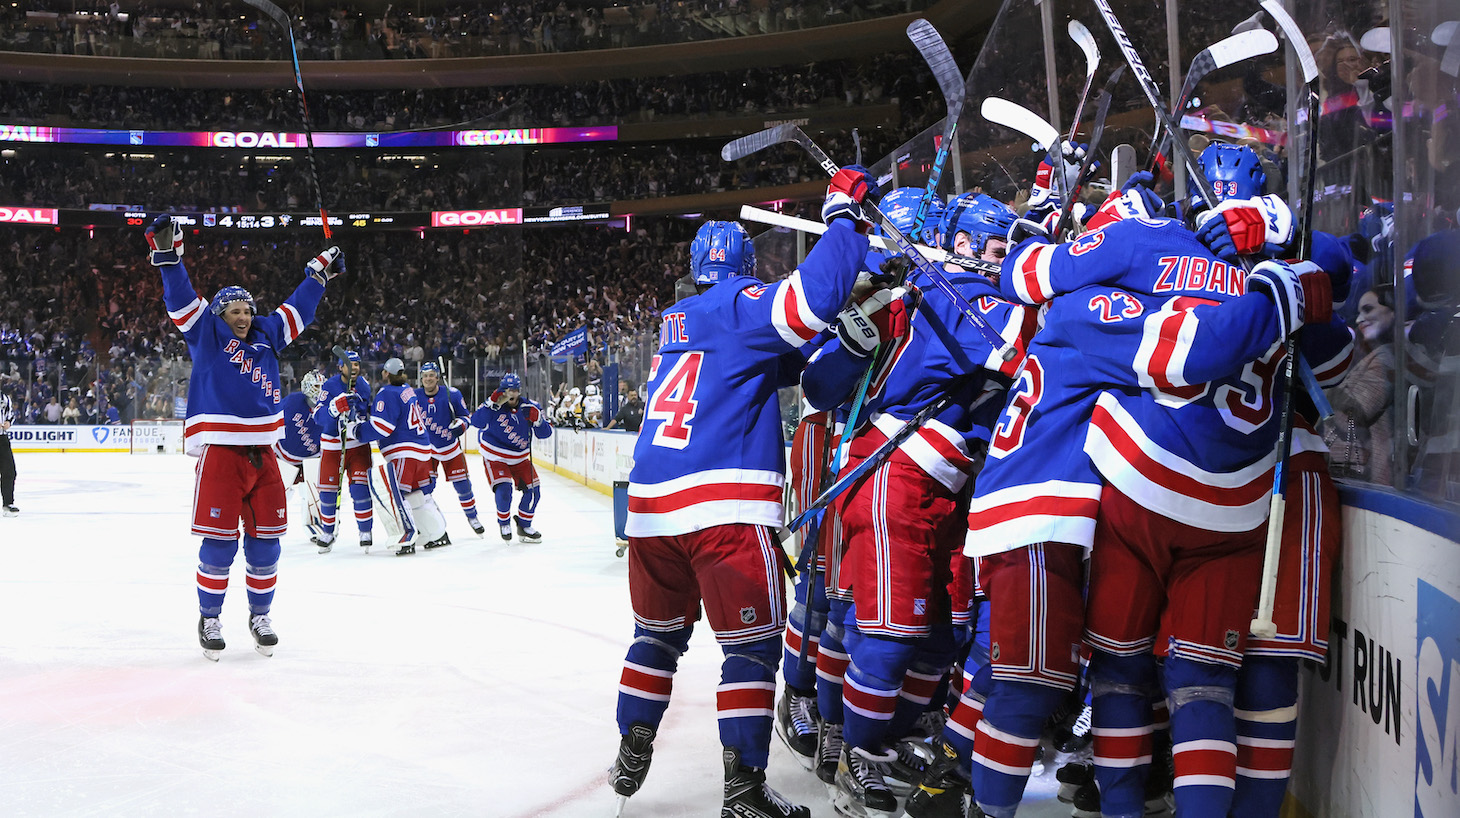 NEW YORK, NEW YORK - MAY 15: Artemi Panarin #10 of the New York Rangers celebrates his game winning overtime goal against the Pittsburgh Penguins in Game Seven of the First Round of the 2022 Stanley Cup Playoffs at Madison Square Garden on May 15, 2022 in New York City. (Photo by Bruce Bennett/Getty Images)